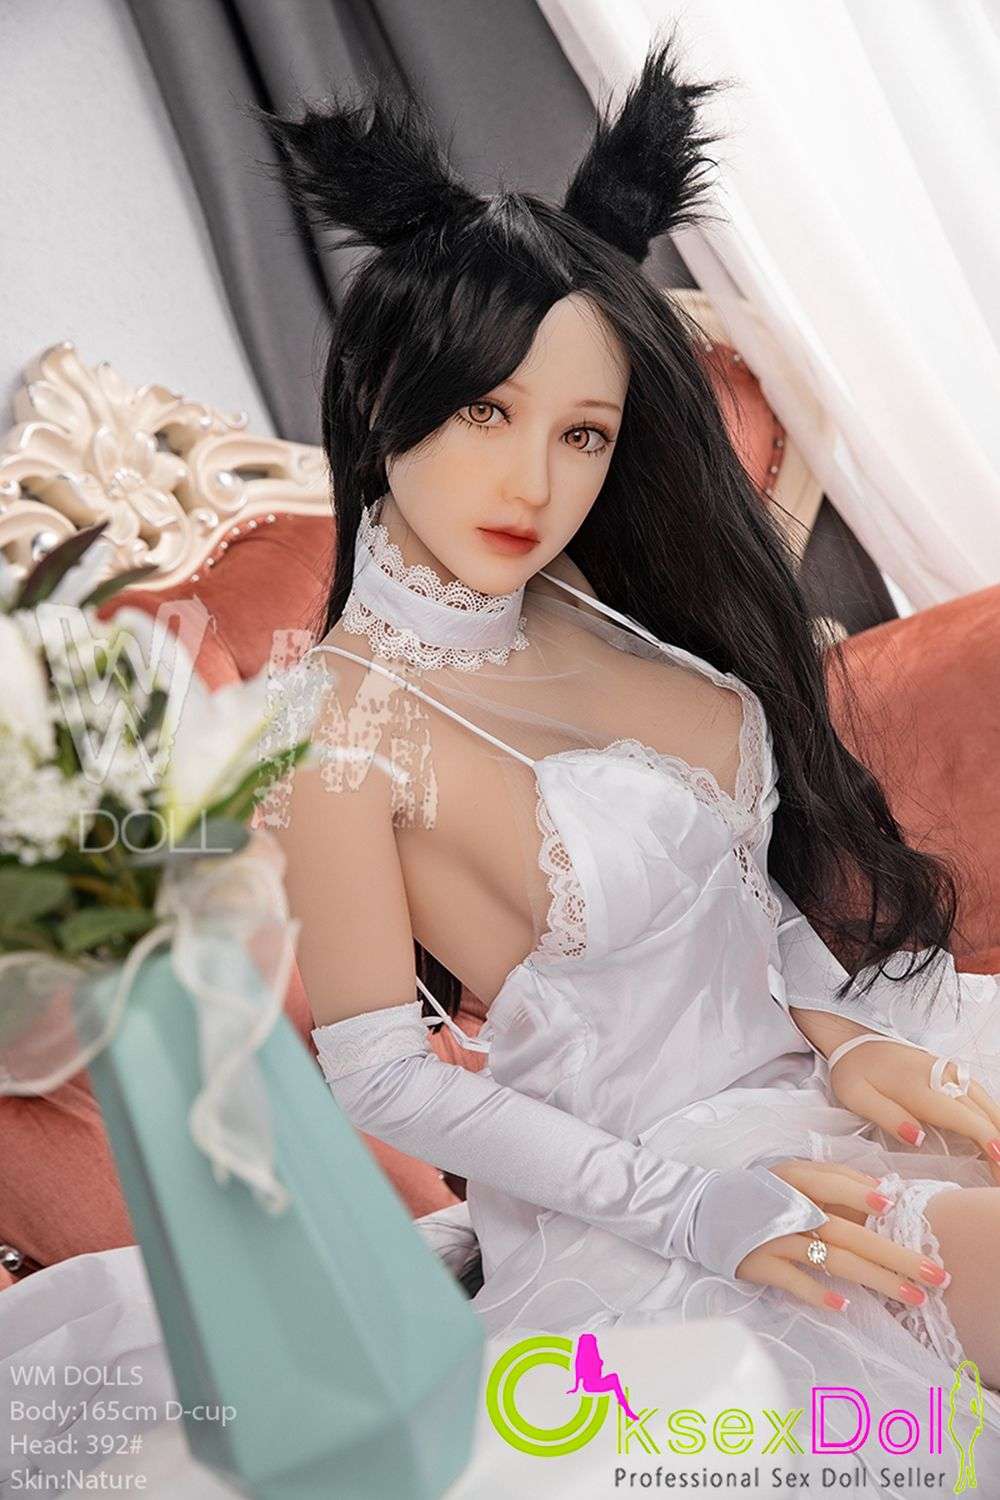 Busty Boobs sex dolls images